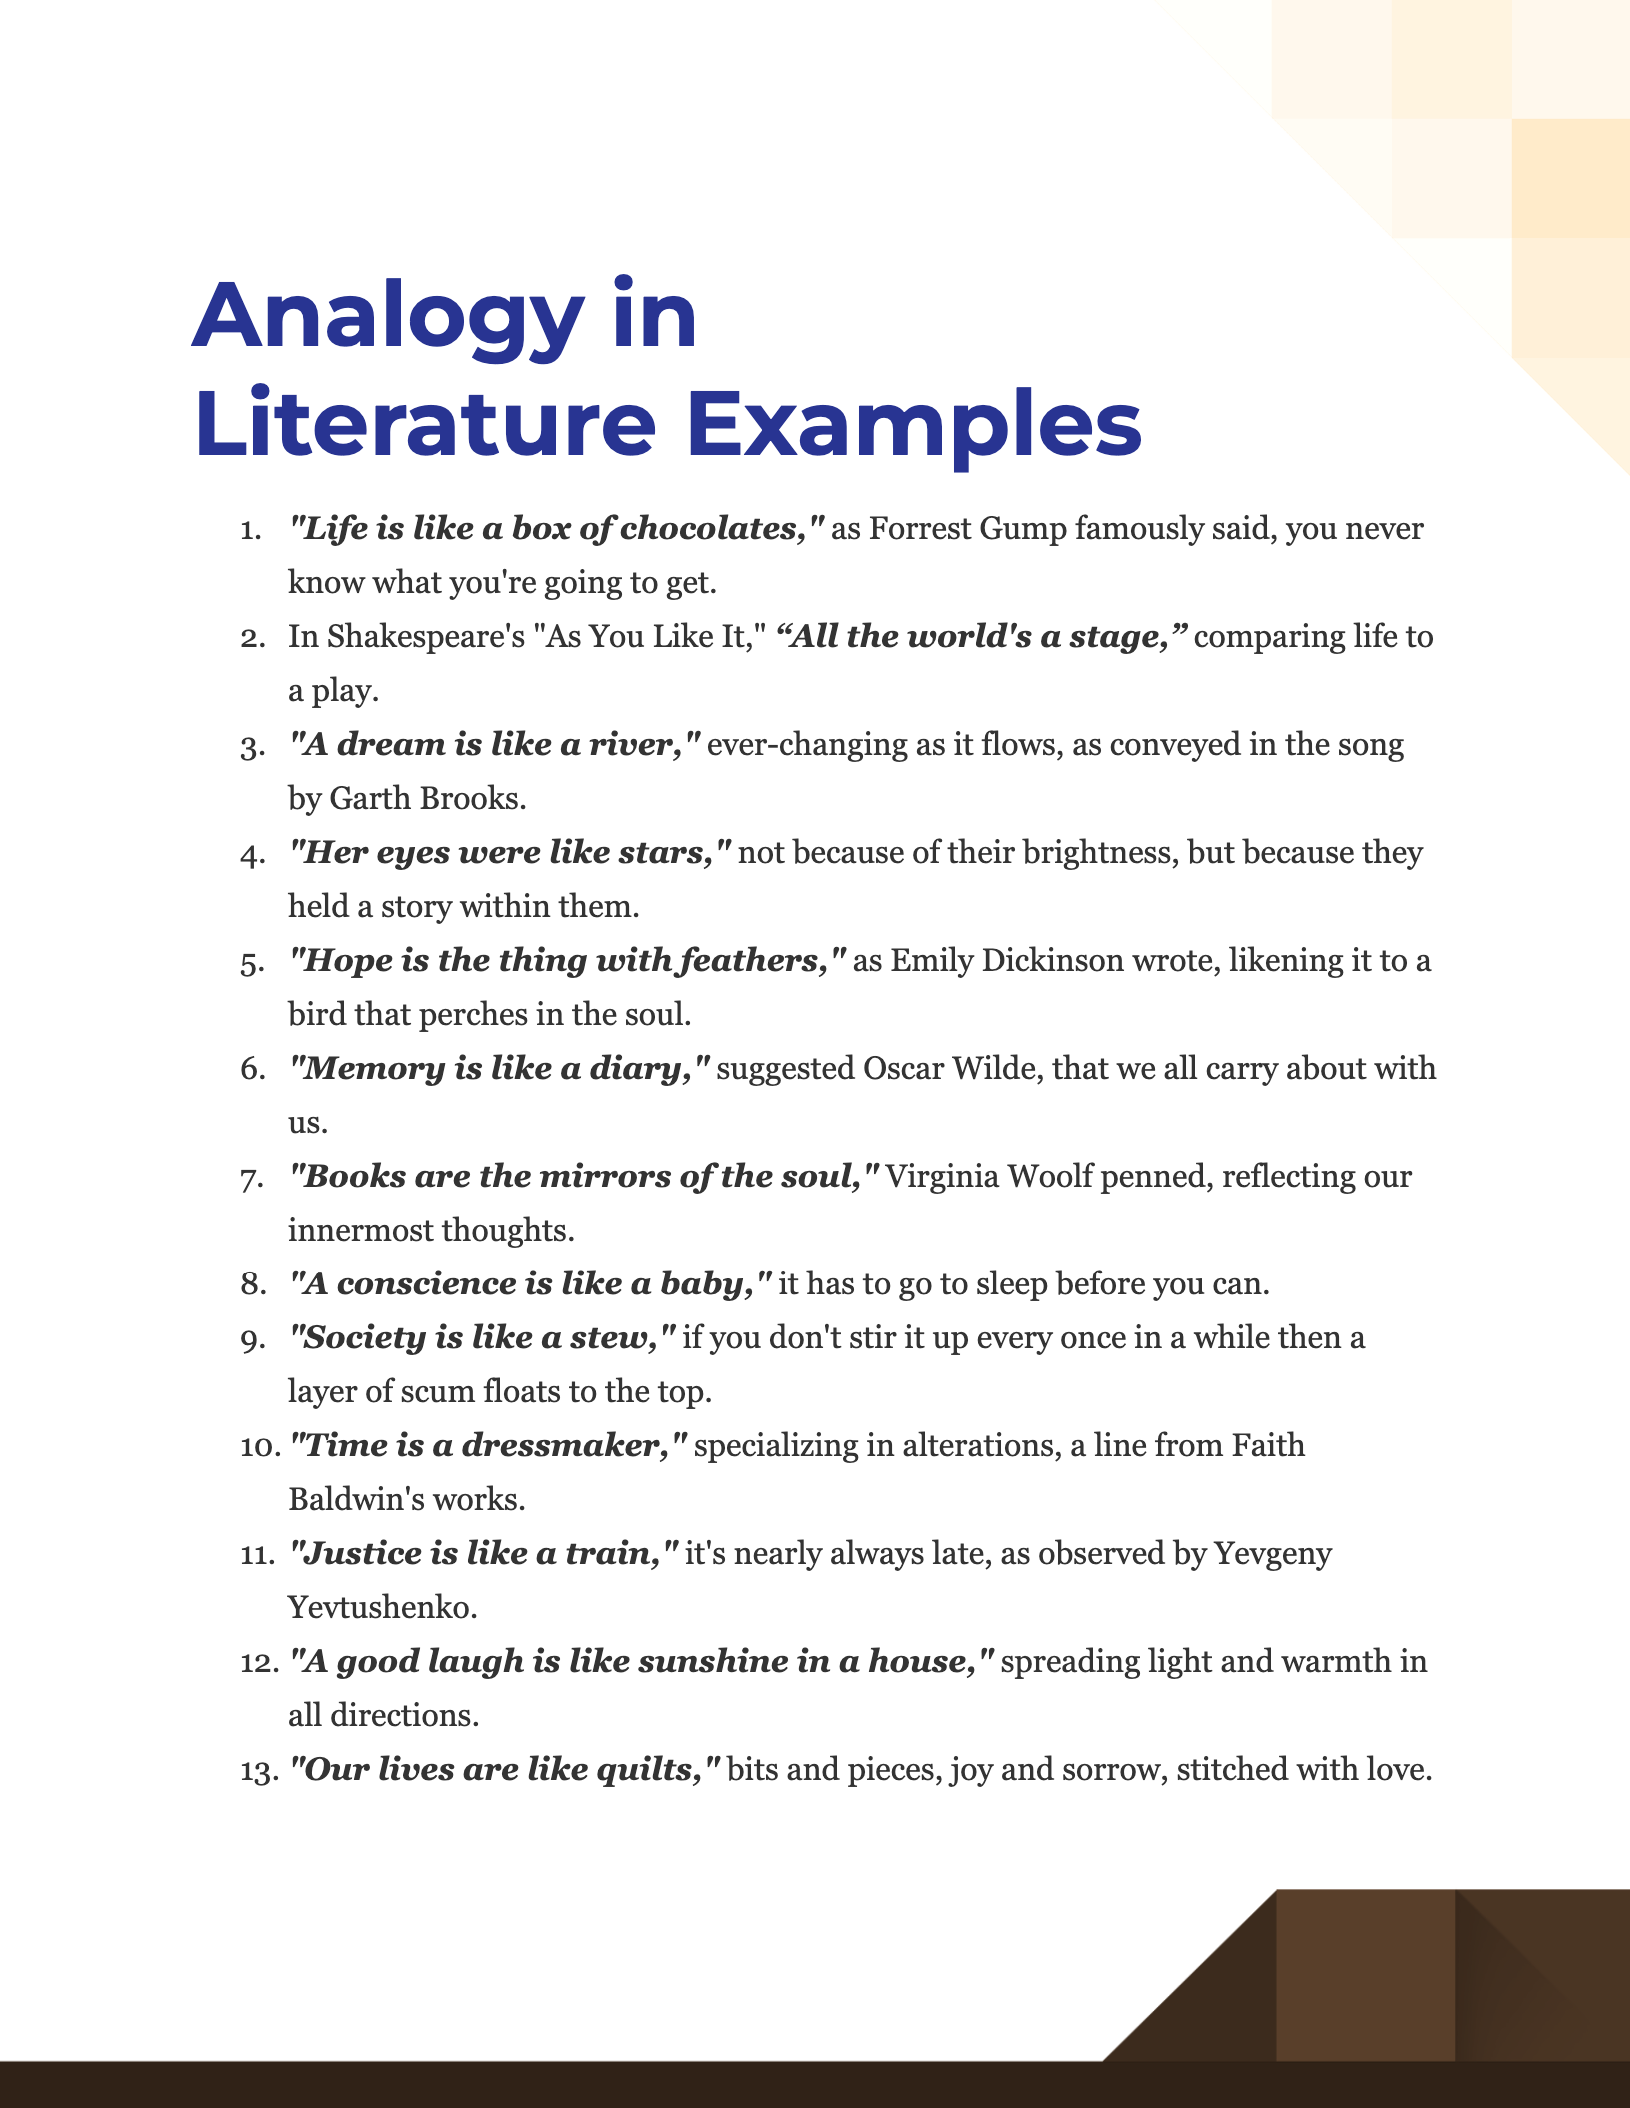 Analogy in Literature Examples